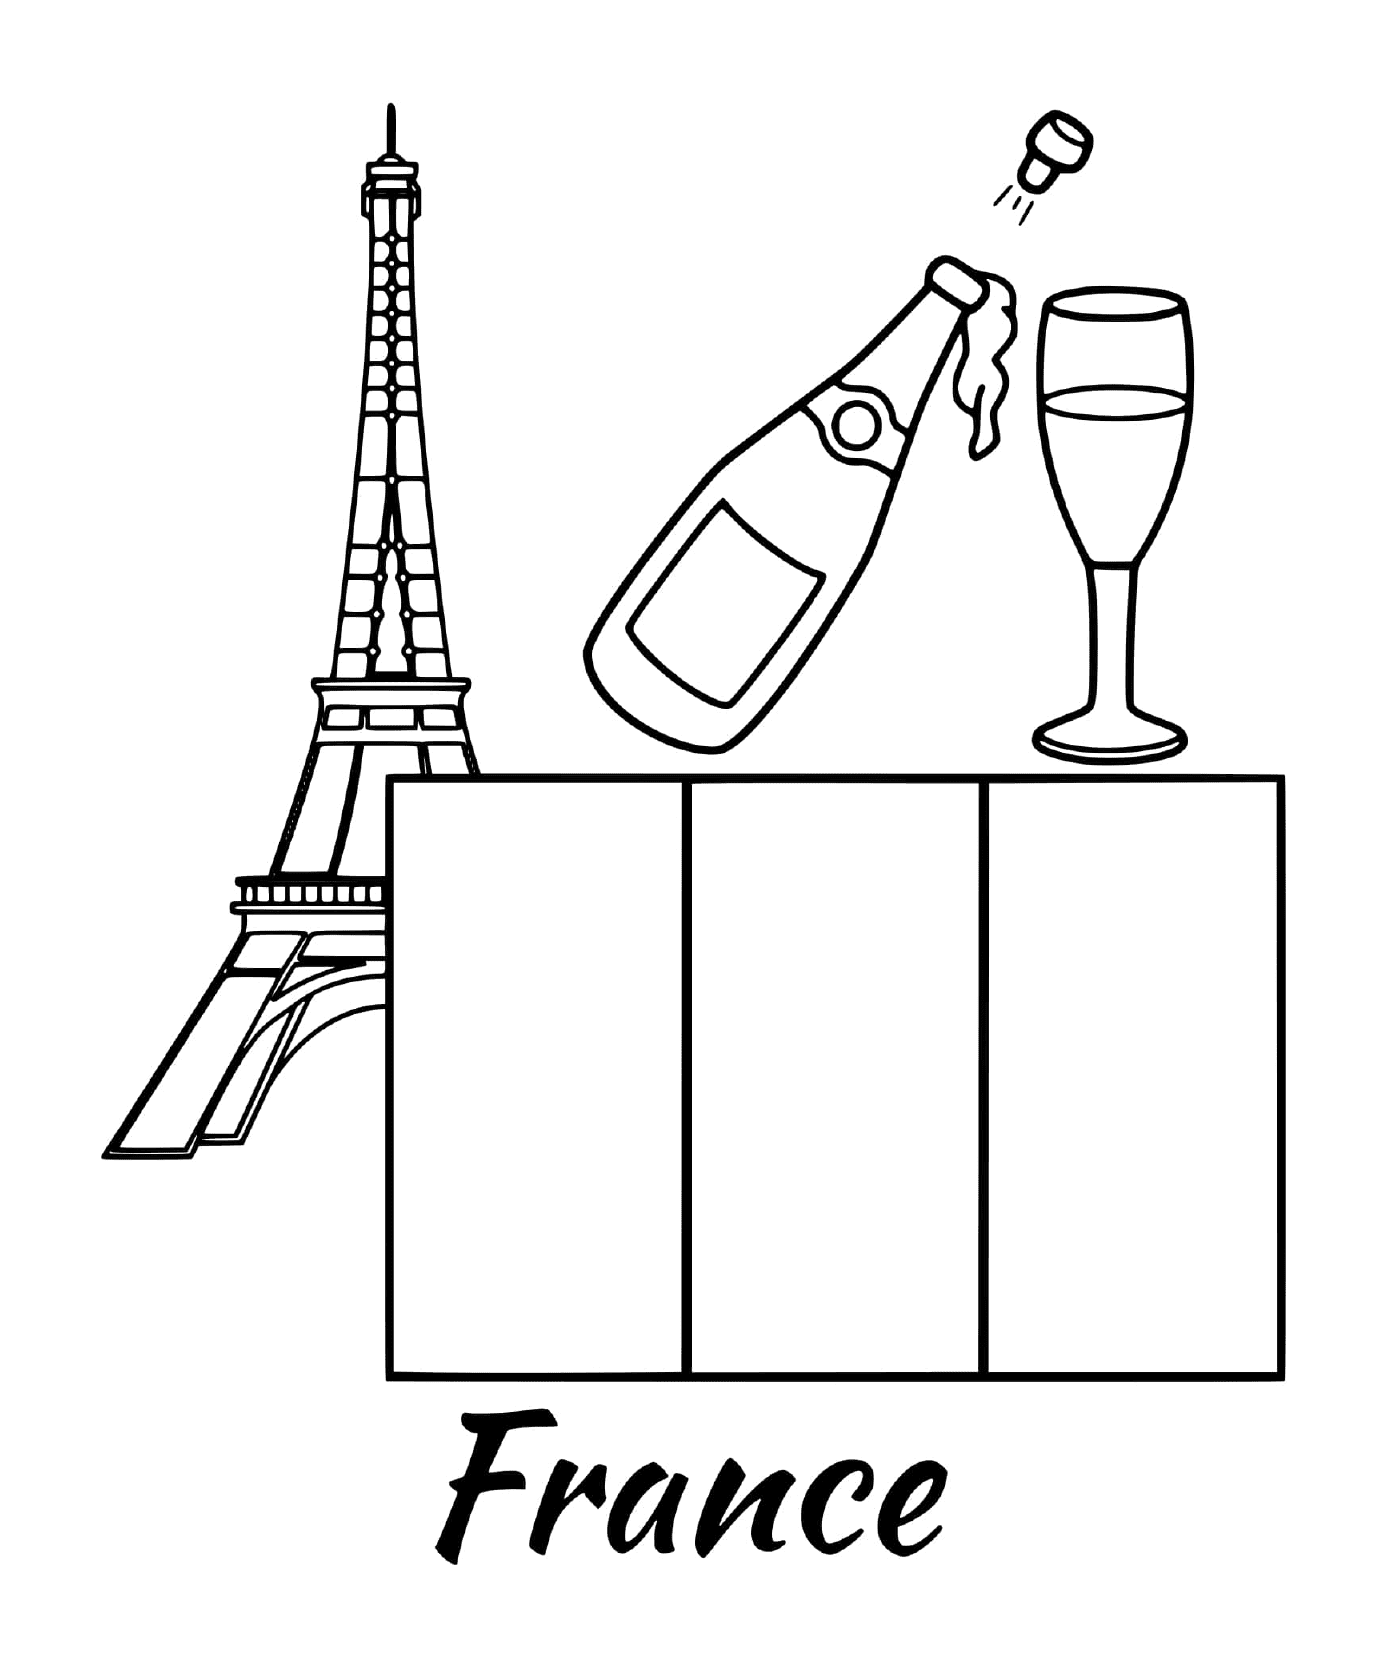  Flag of France with the Eiffel Tower 